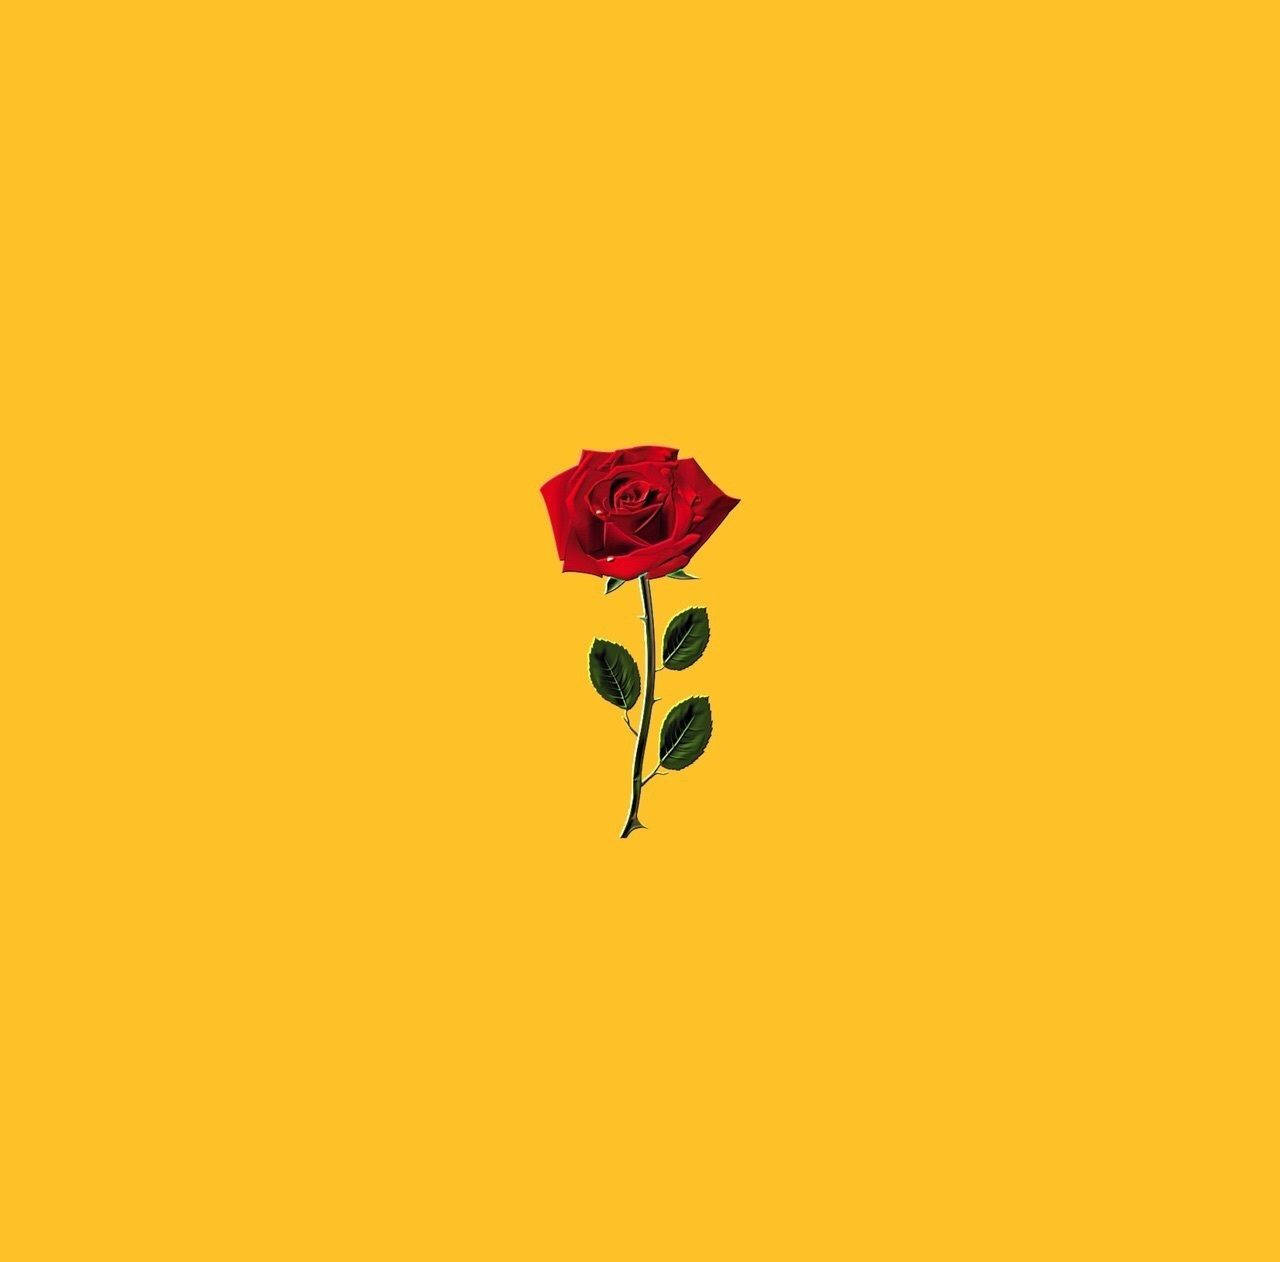 Red Rose For Cute Yellow Background Wallpaper